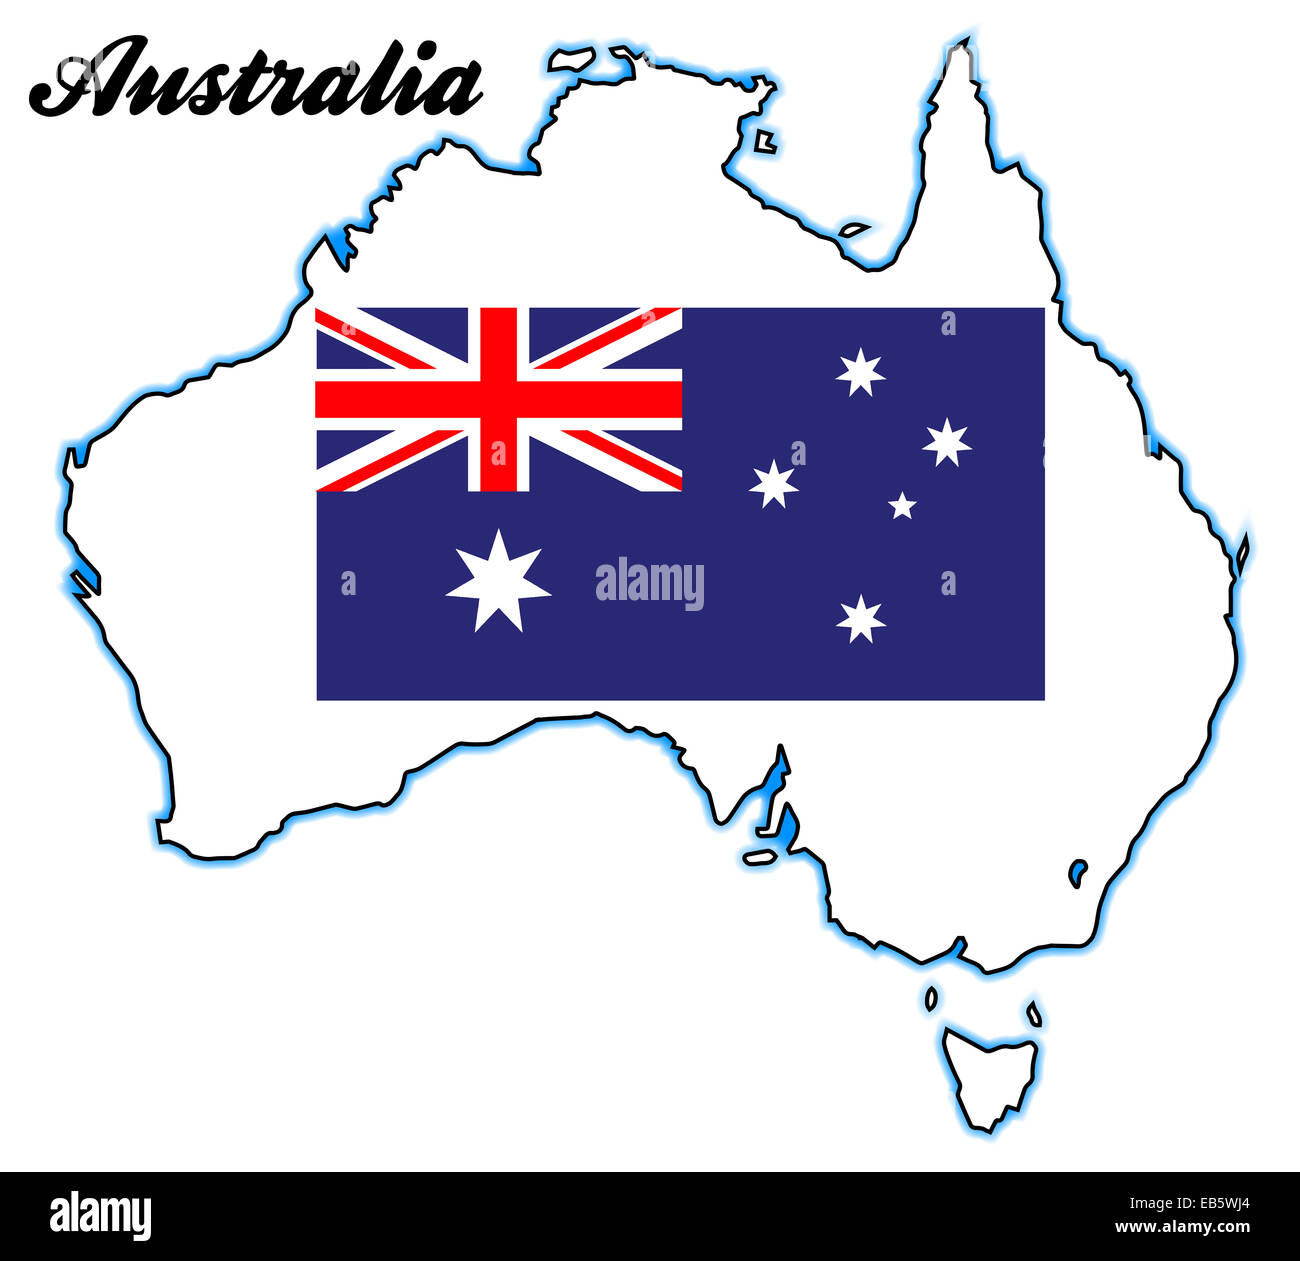 Outline map of Australia over a white background with flag inset Stock Photo